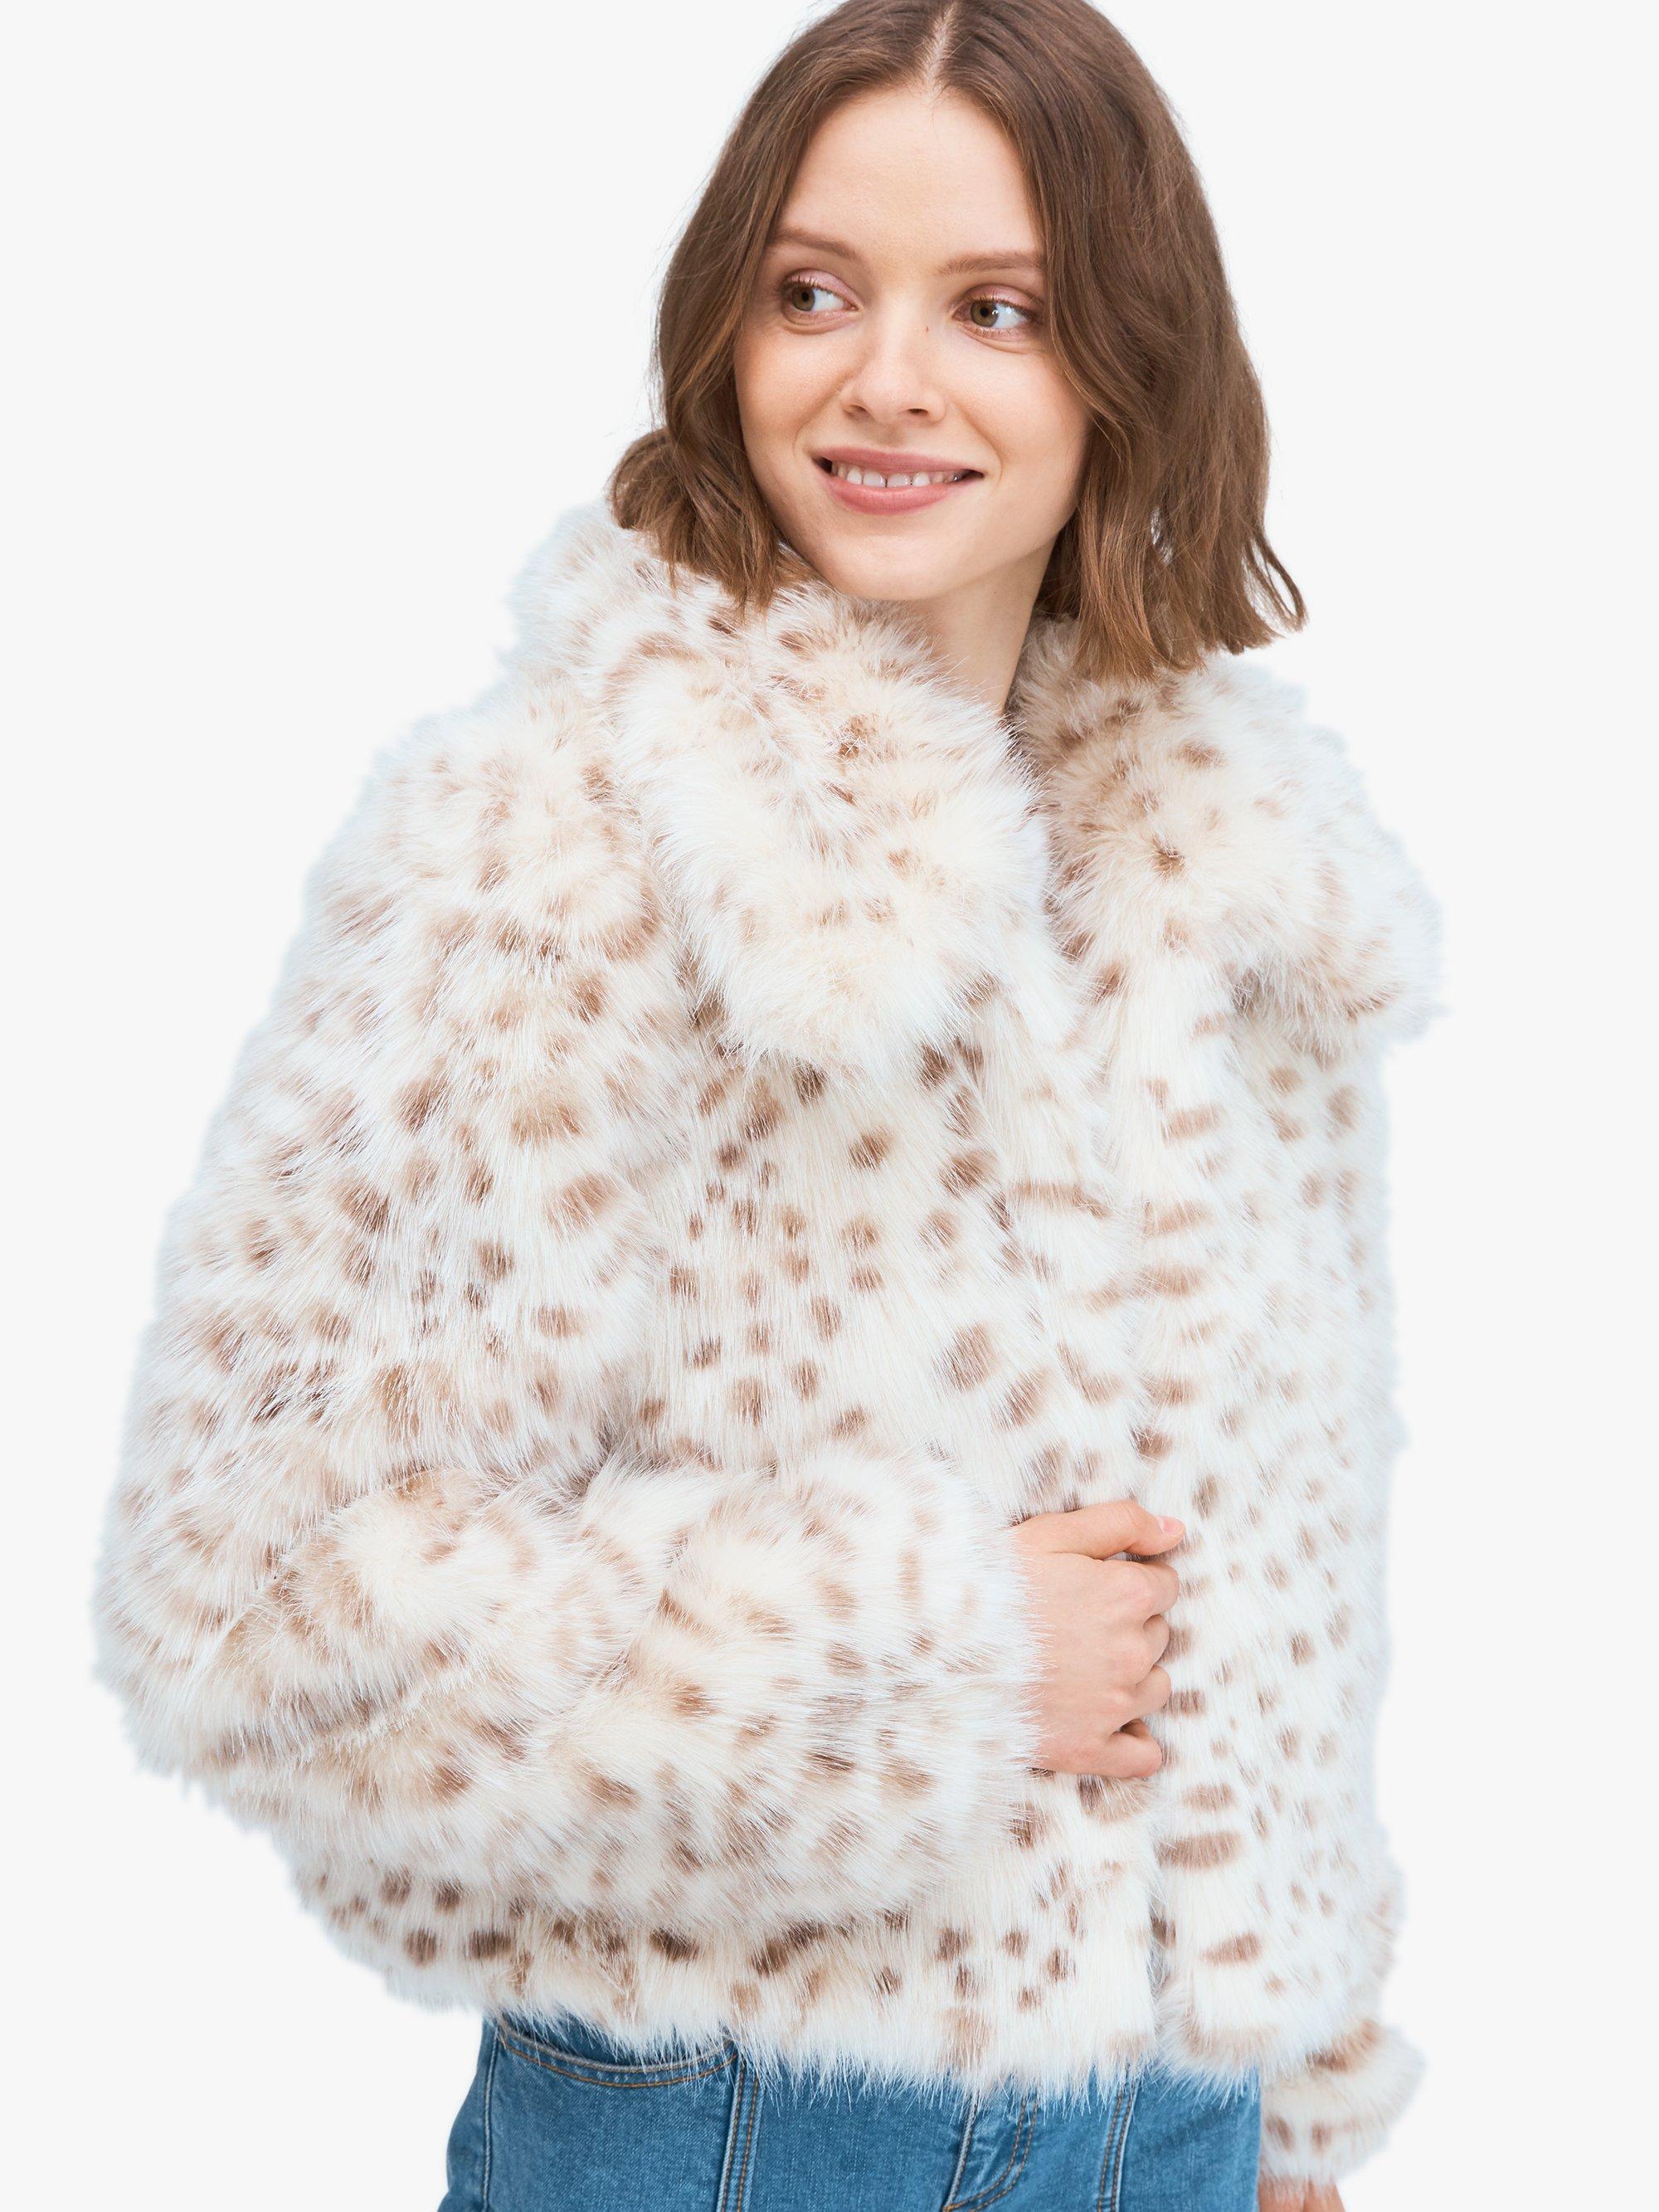 Kate Spade Spotted Faux Fur Jacket - Lyst